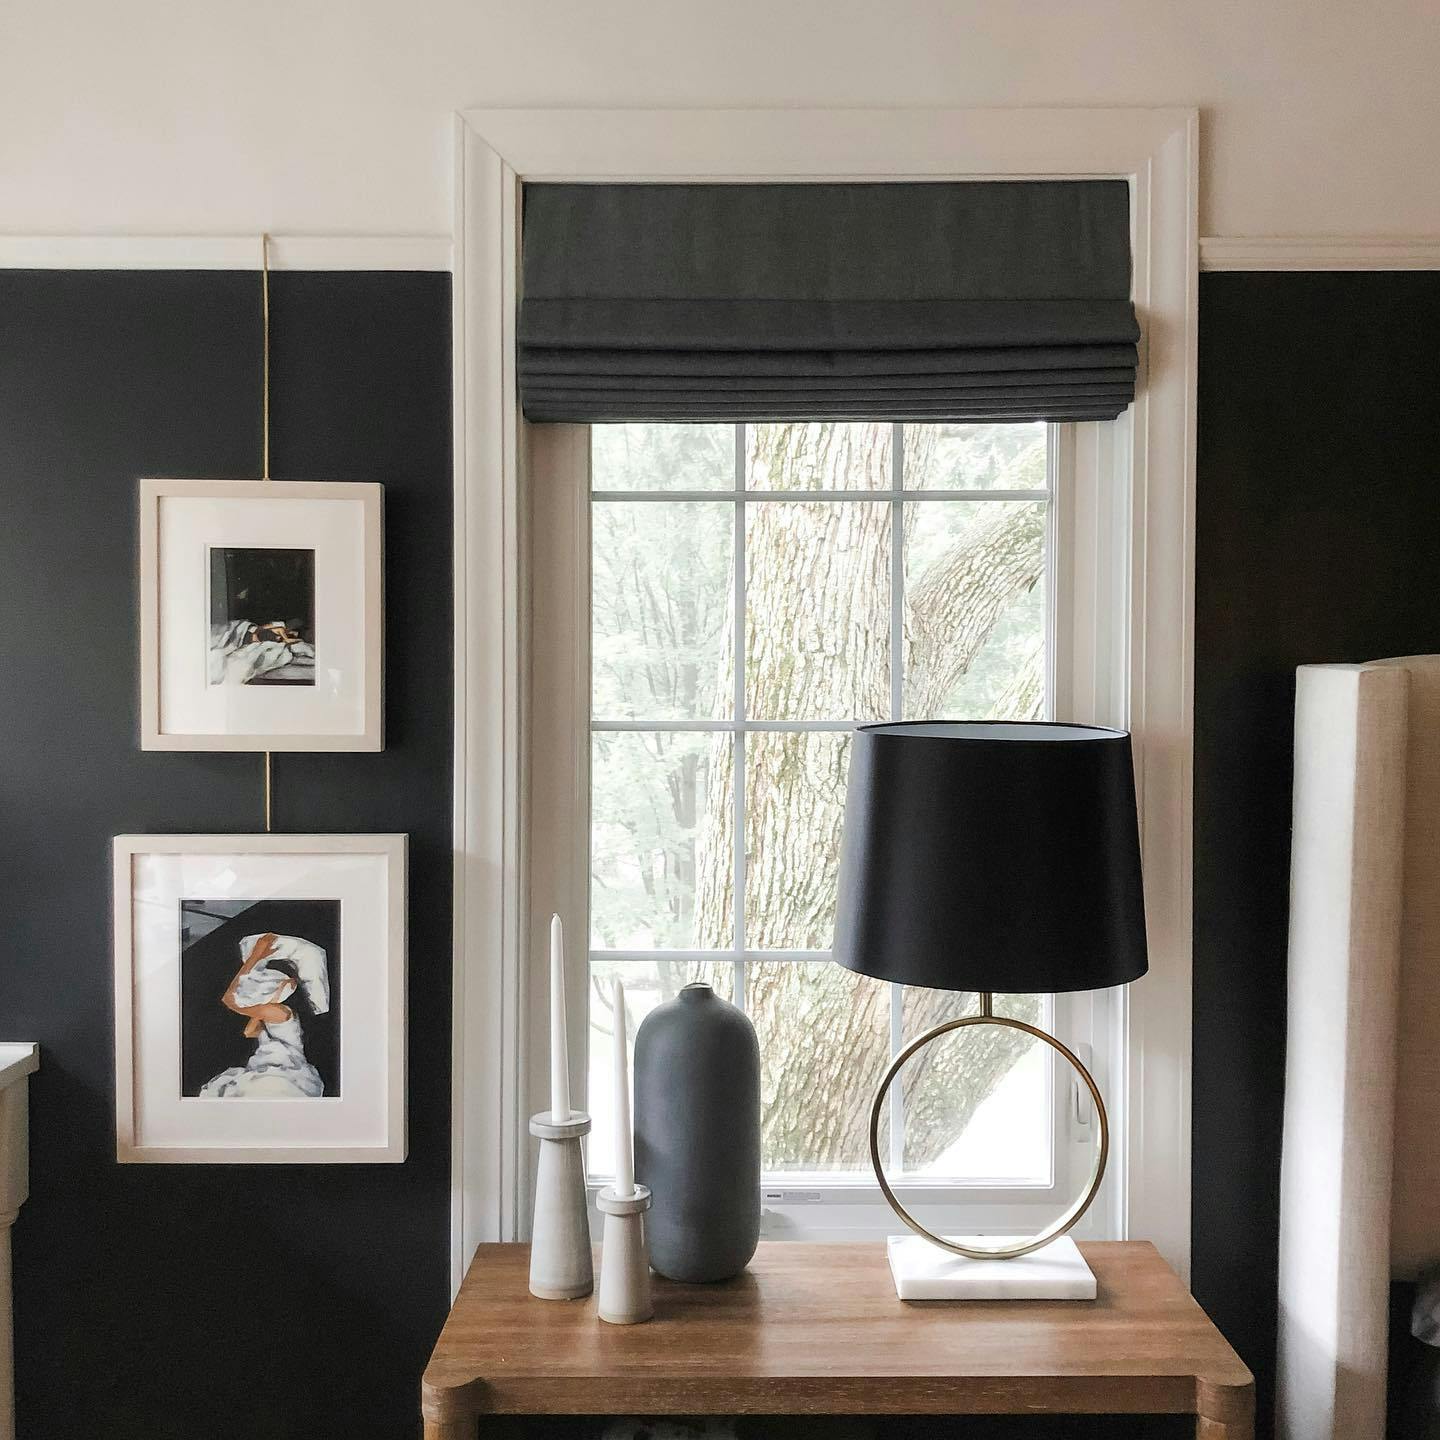 A modern black and white window display with premium roman shades.